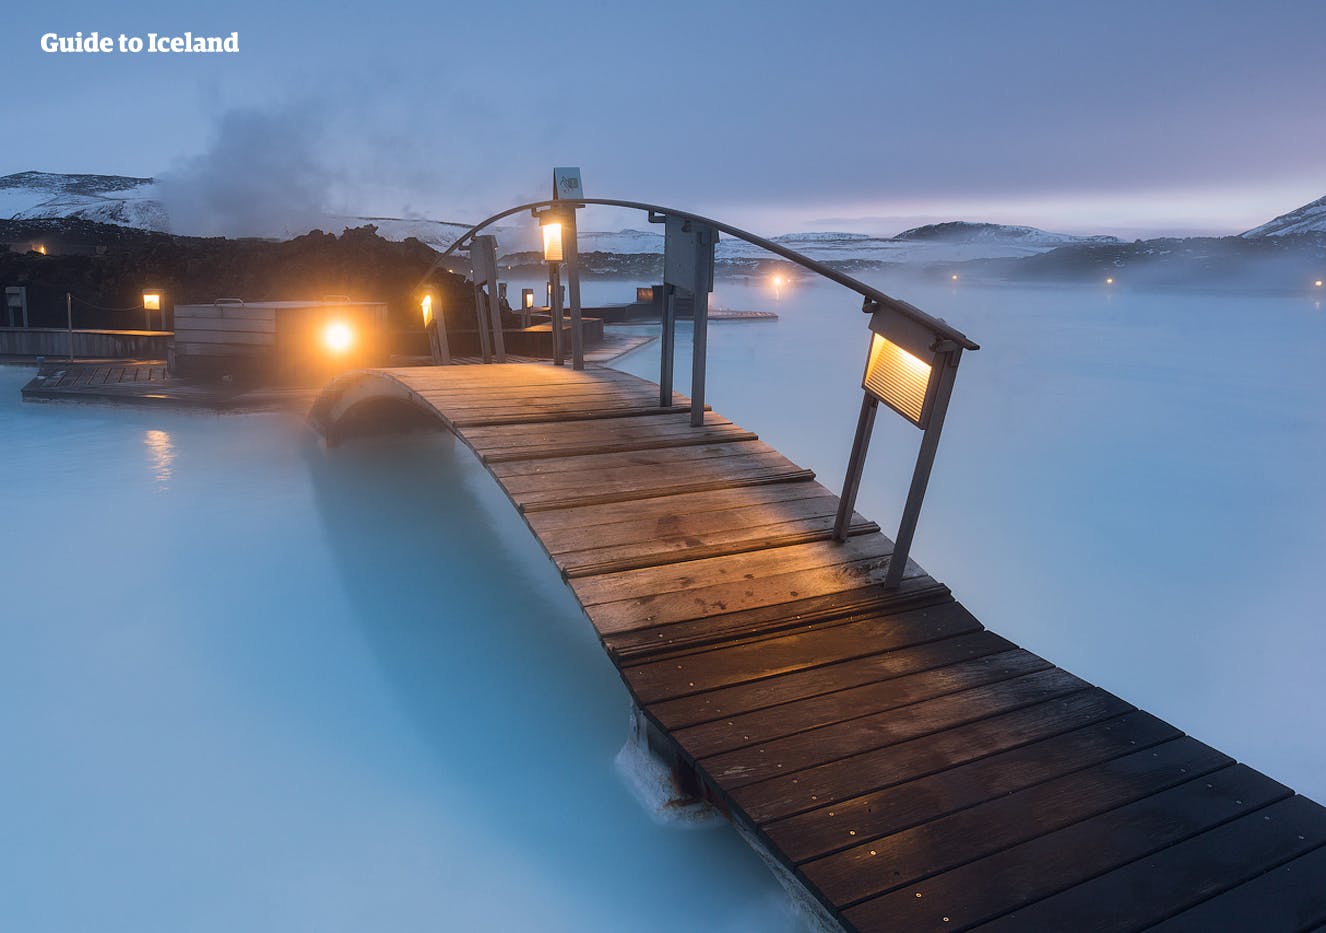 For a truly luxurious experience, visit the Blue Lagoon Spa. For something a little more natural, seek out one of the country's many hidden hot pools.